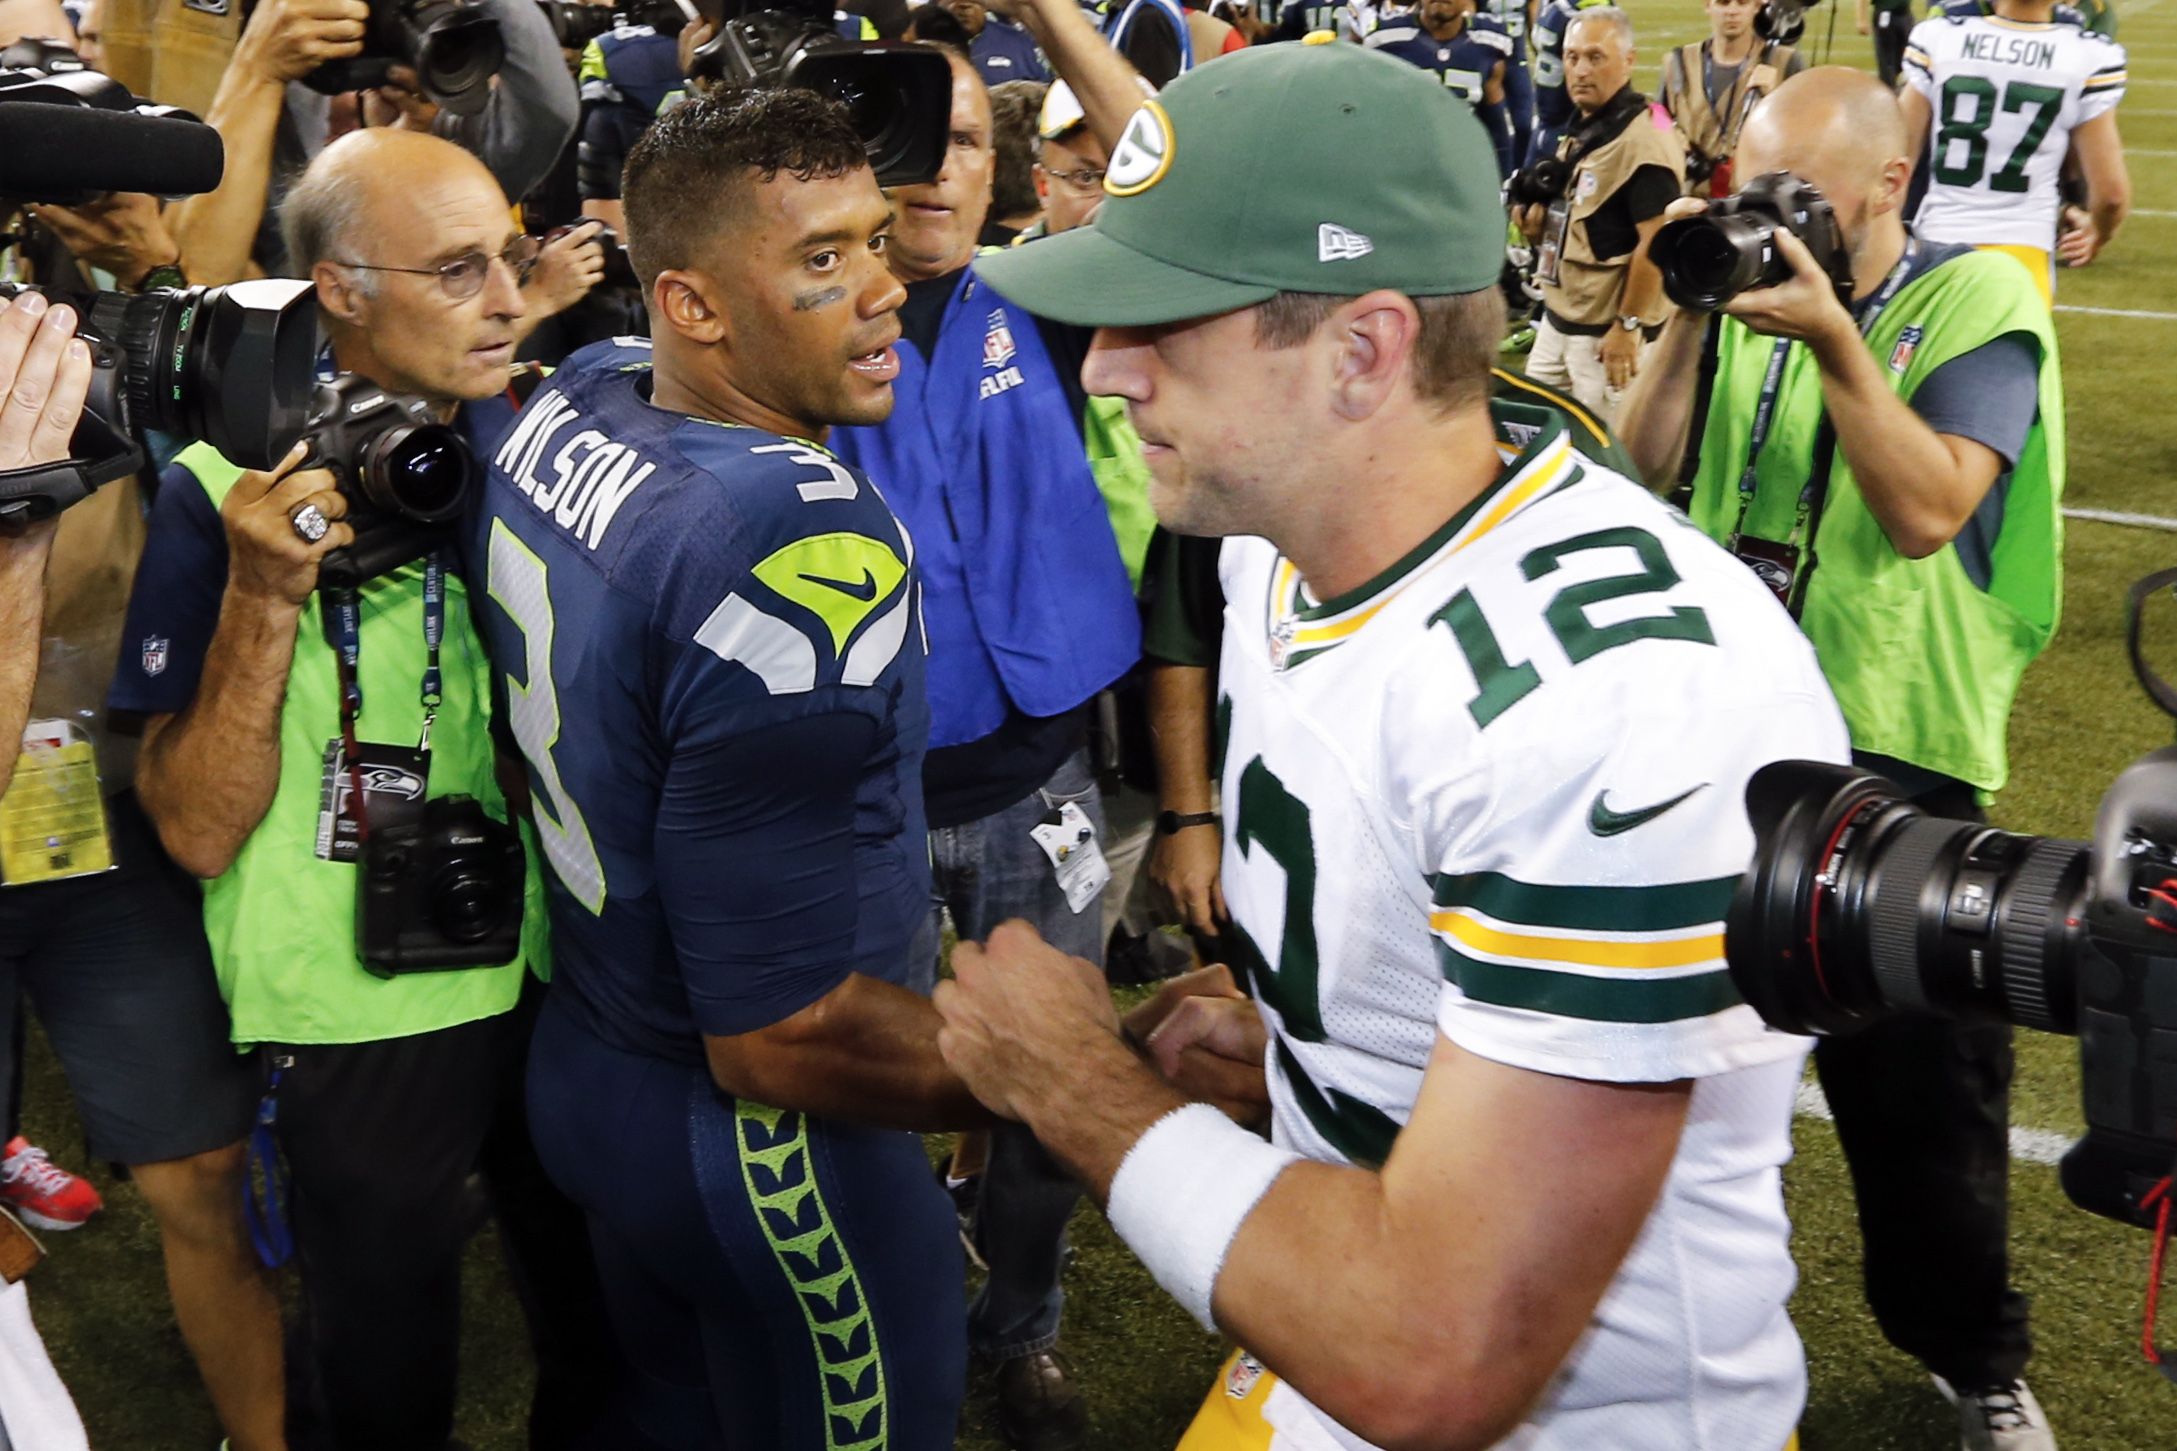 Will Seahawks QB Russell Wilson and NFL MVP Aaron Rodgers (12) vie for another NFC title? (Joe Nicholson, USA TODAY Sports)